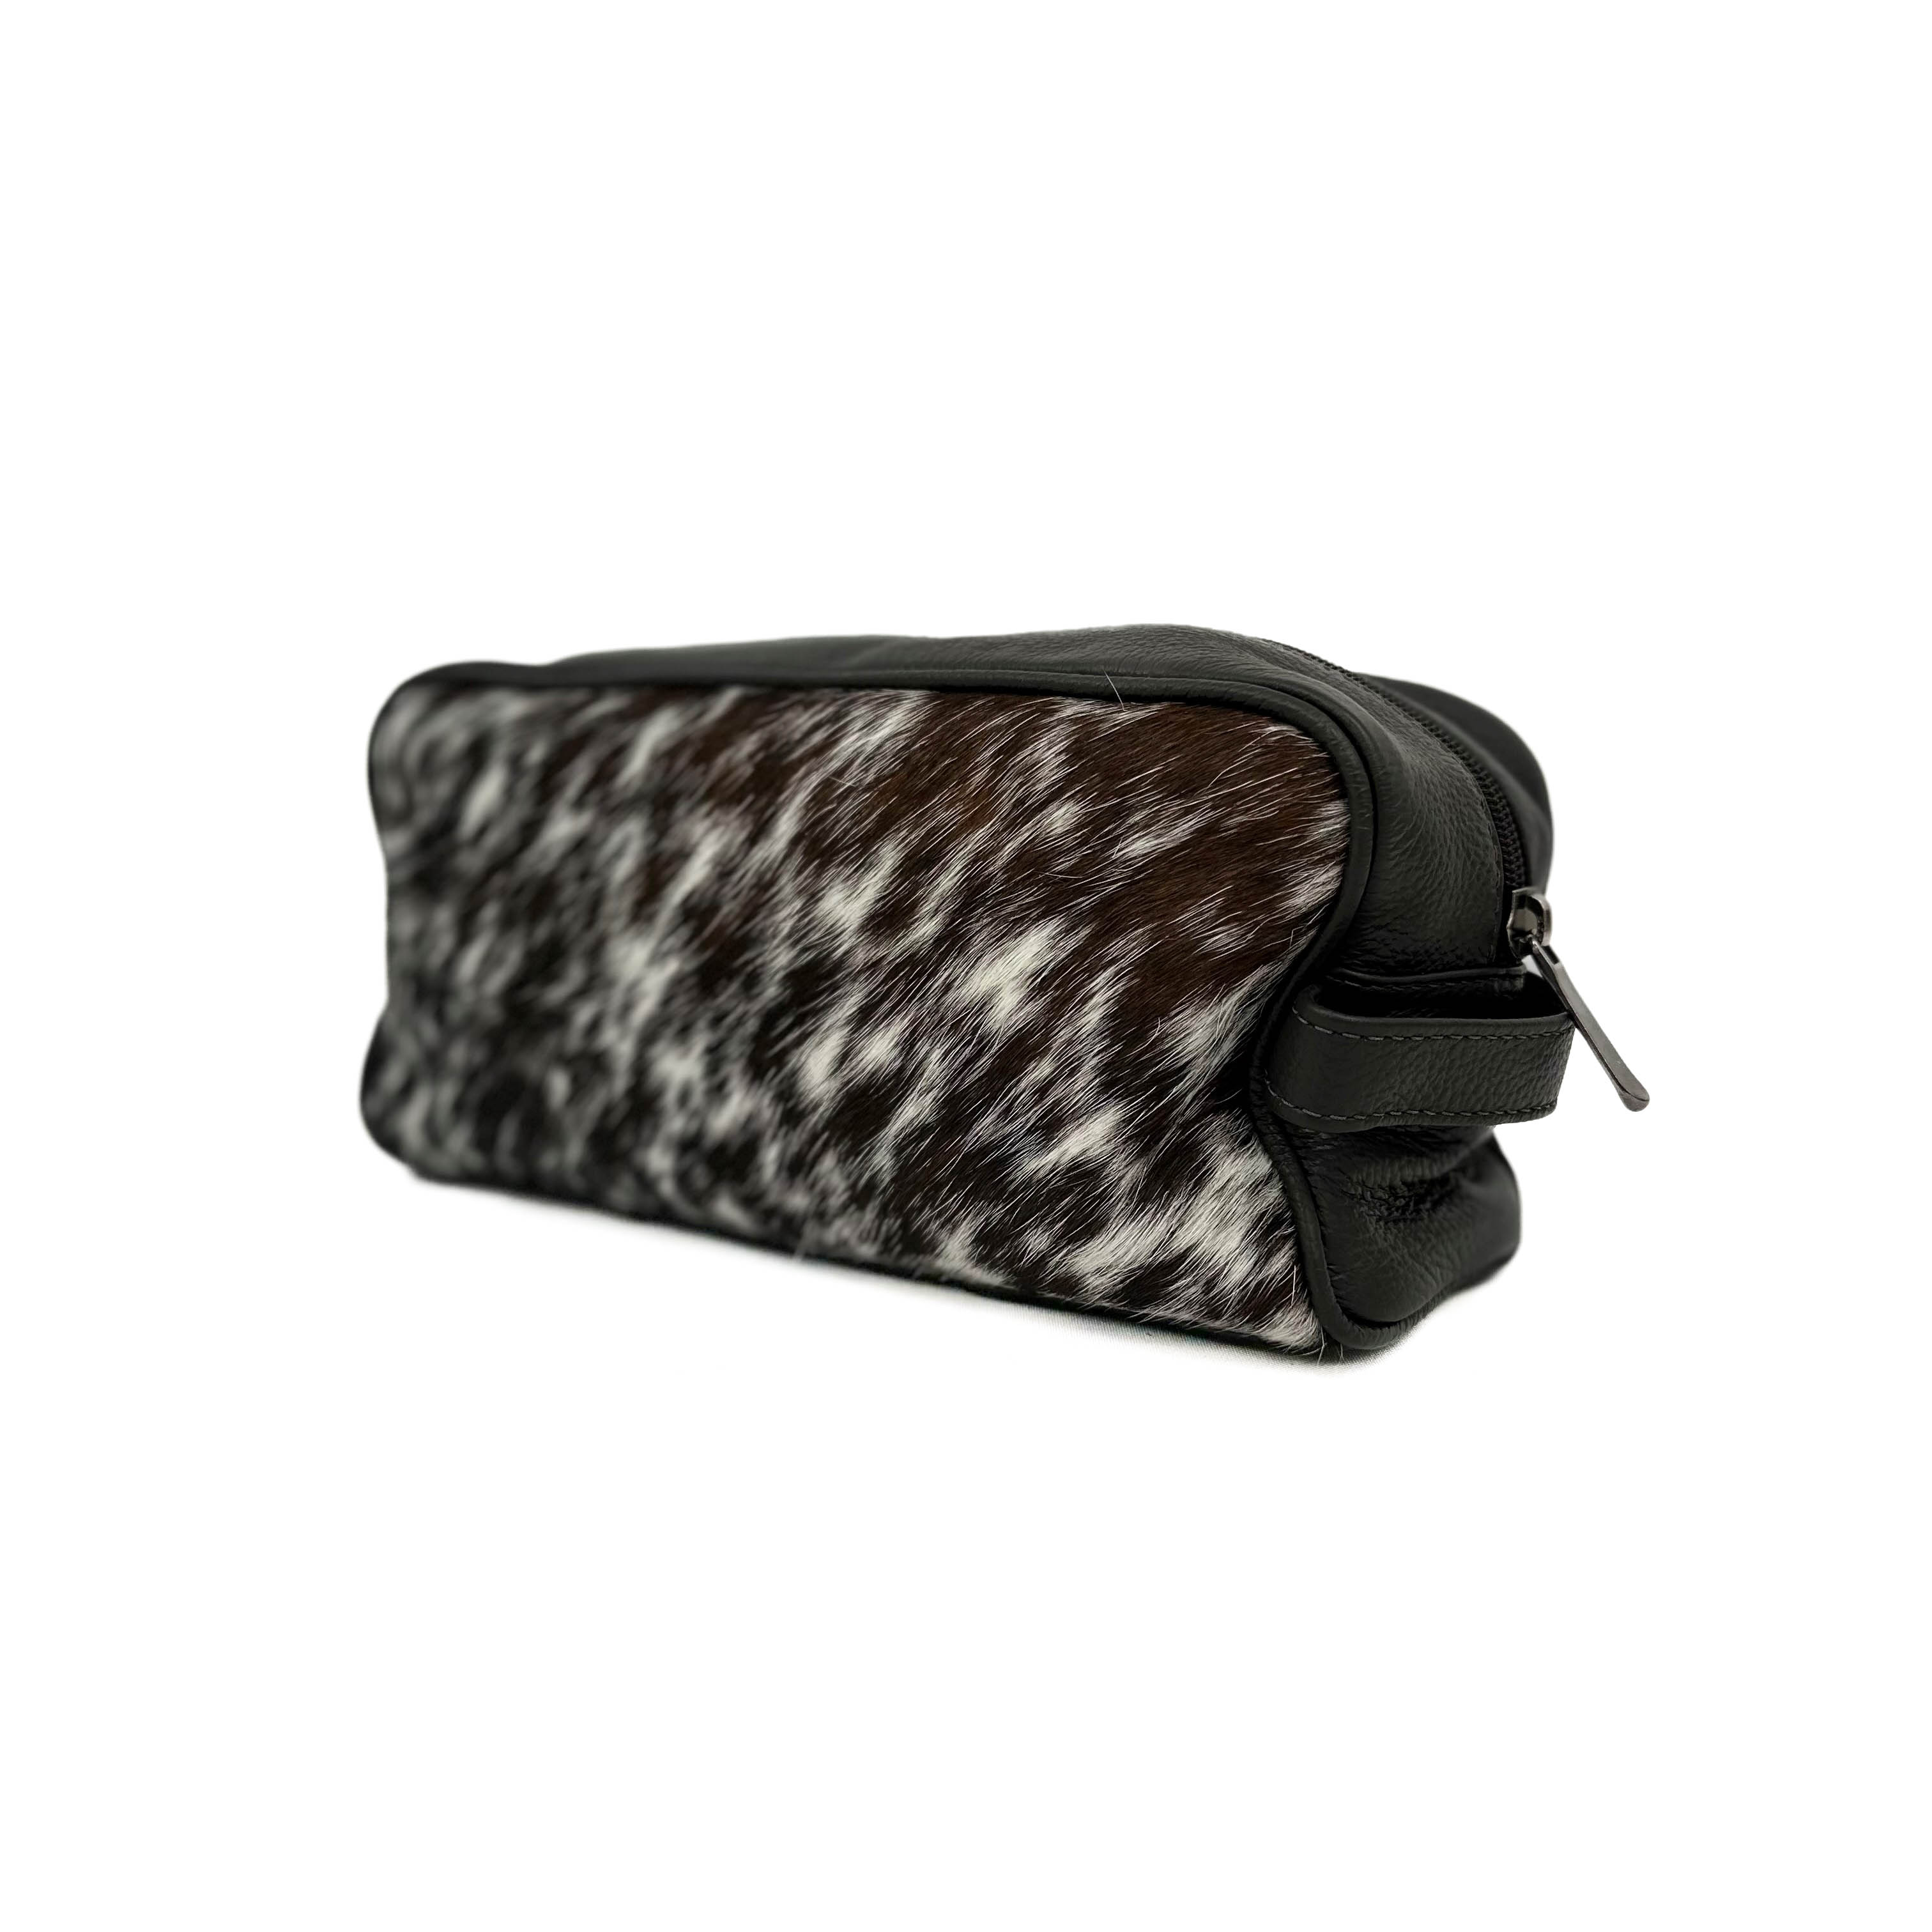 Cowhide & Leather Toiletry Bag